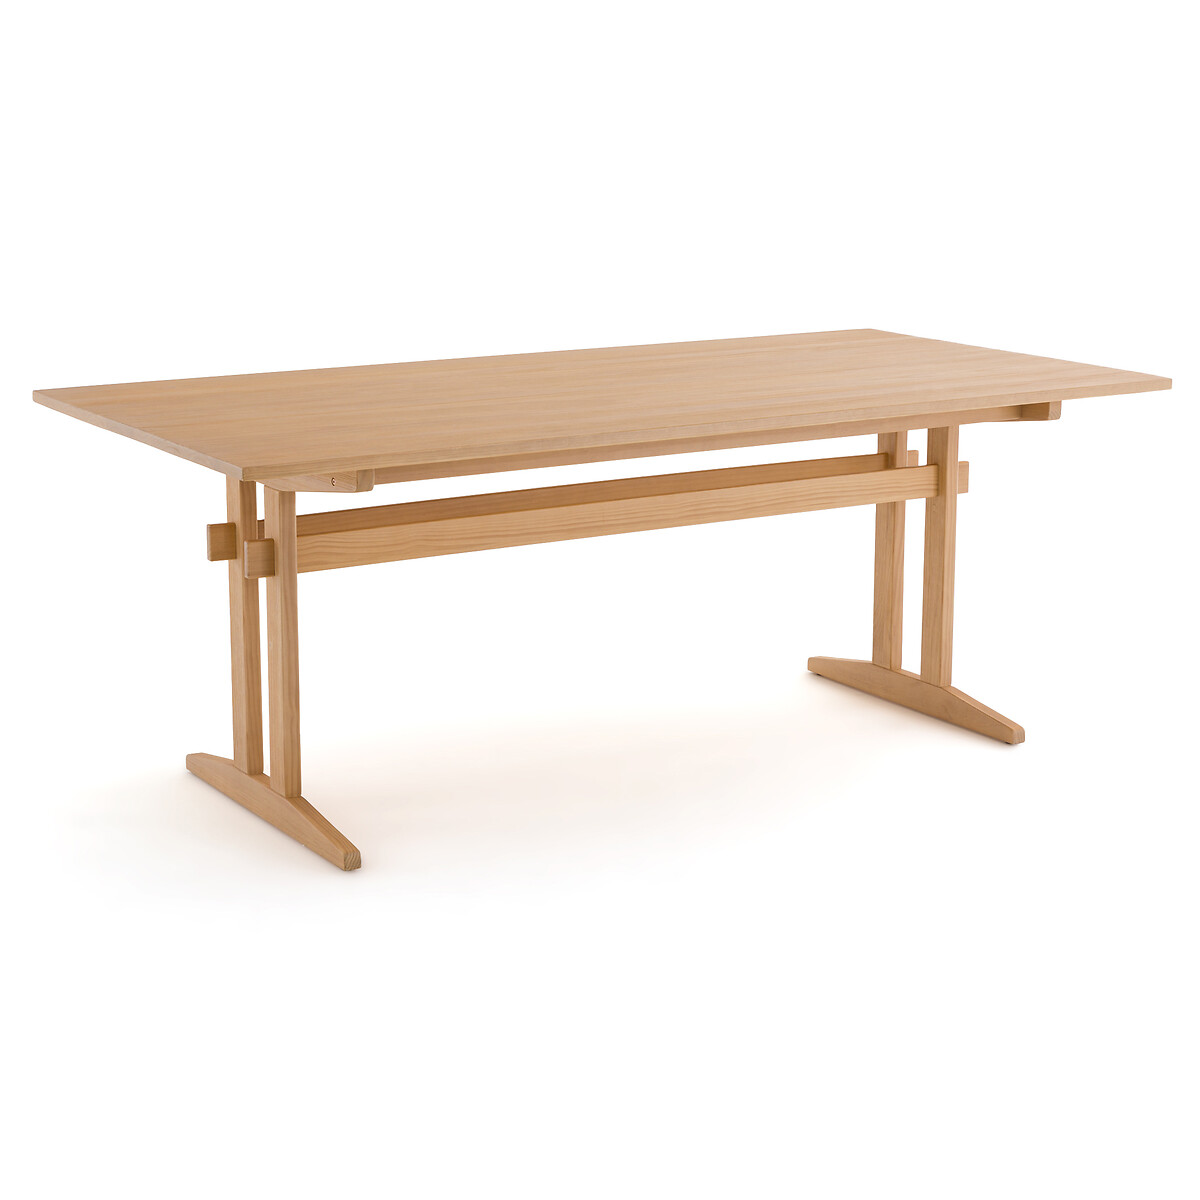 Sergey Brushed Solid Pine Dining Table (Seats 6-8)